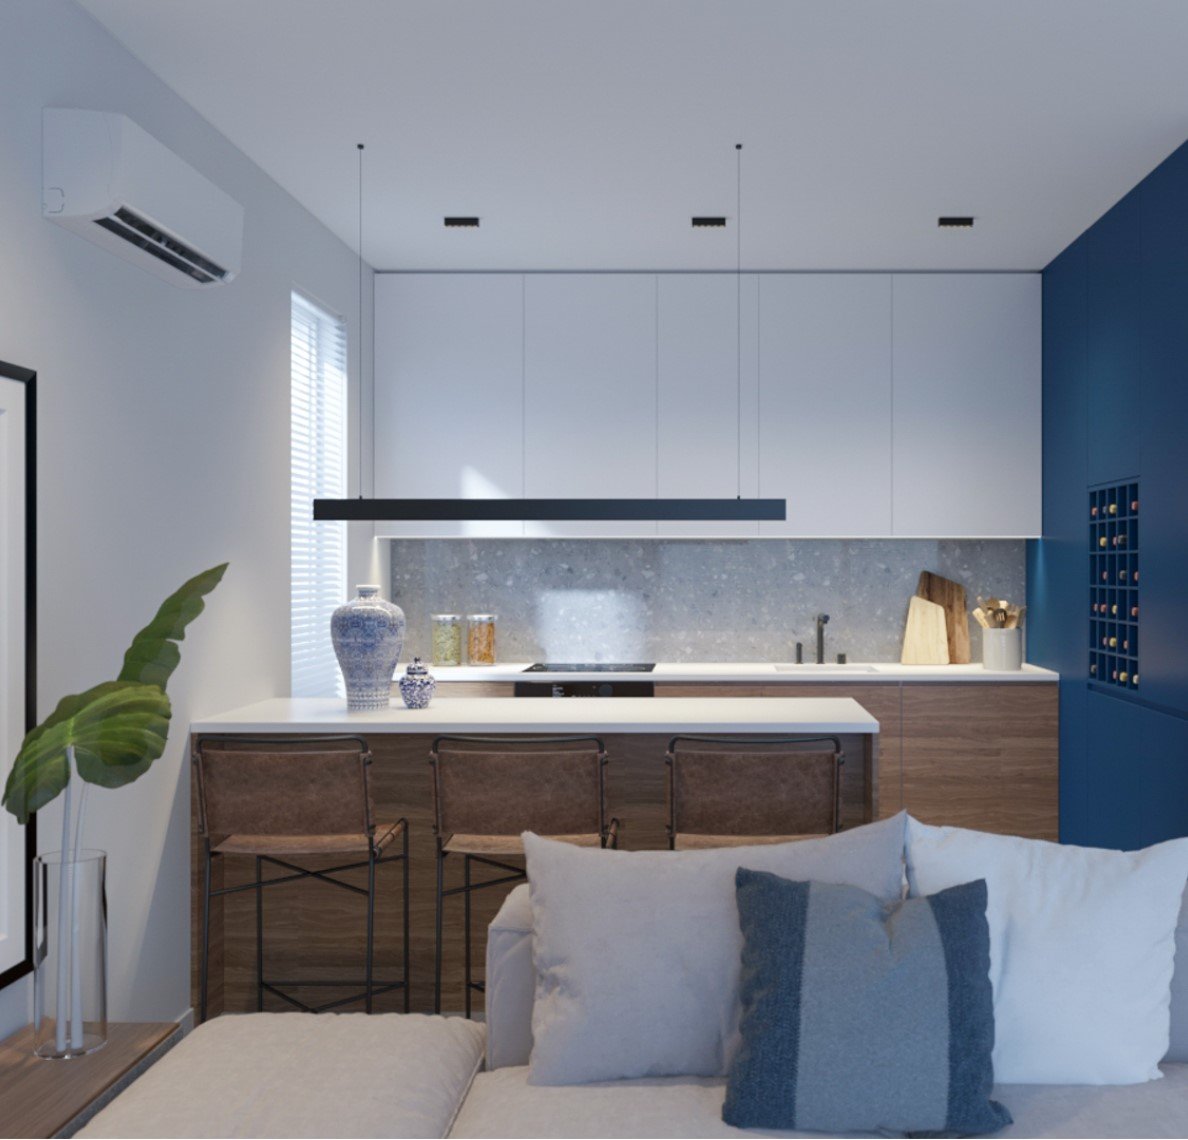 "Modern kitchen remodel featuring a white and blue color scheme, sleek cabinetry, and a cozy seating area.